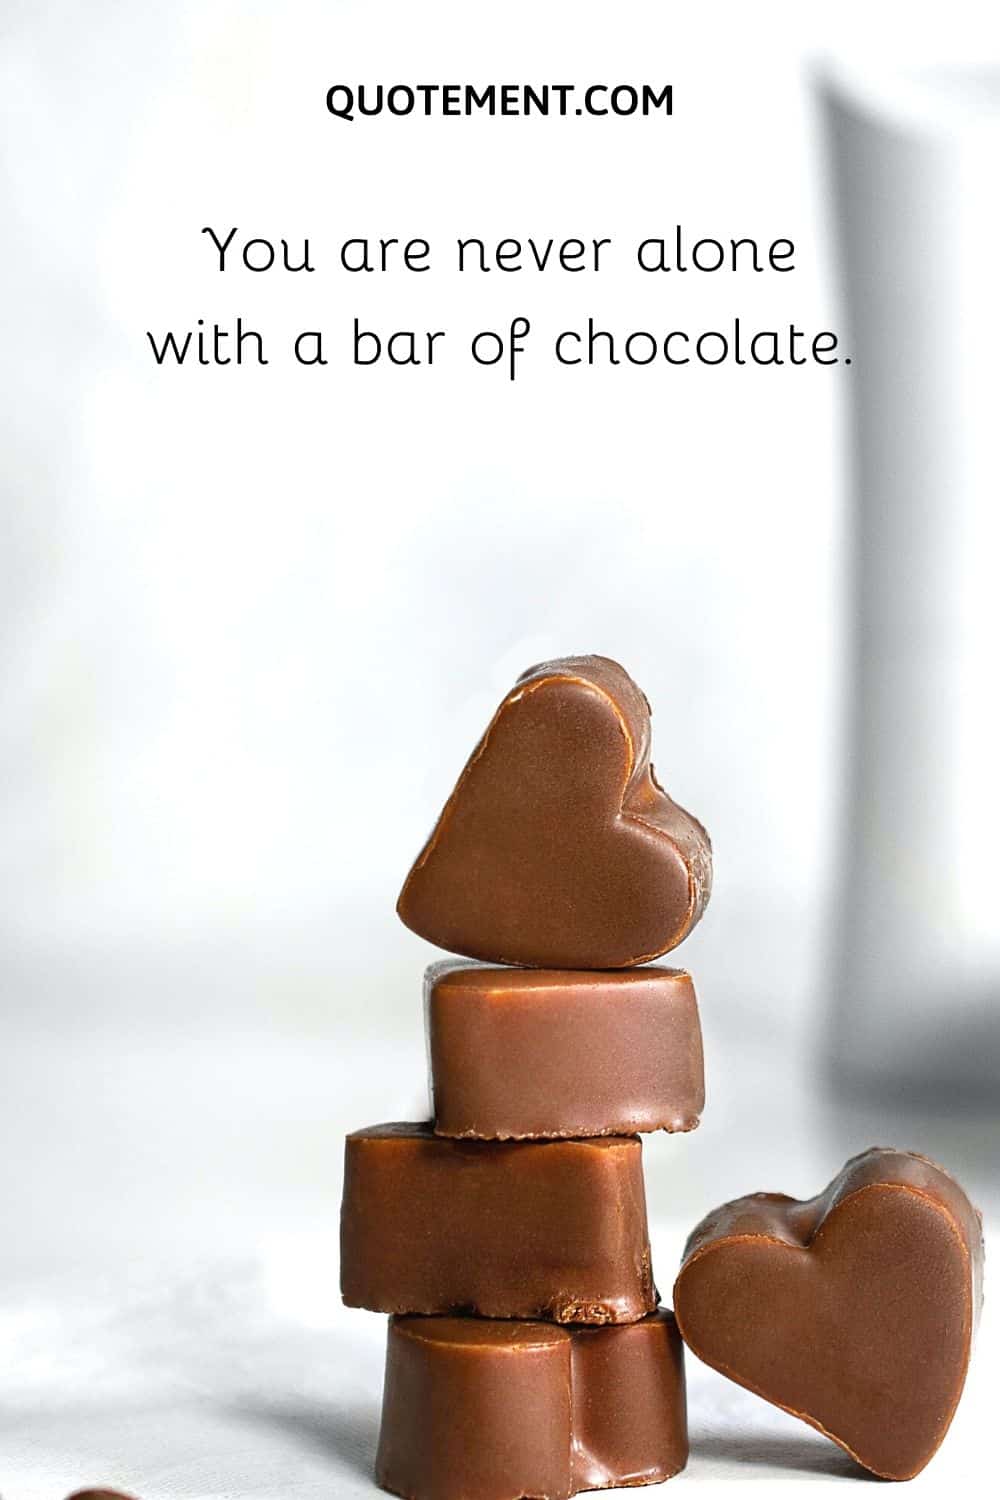 You are never alone with a bar of chocolate.